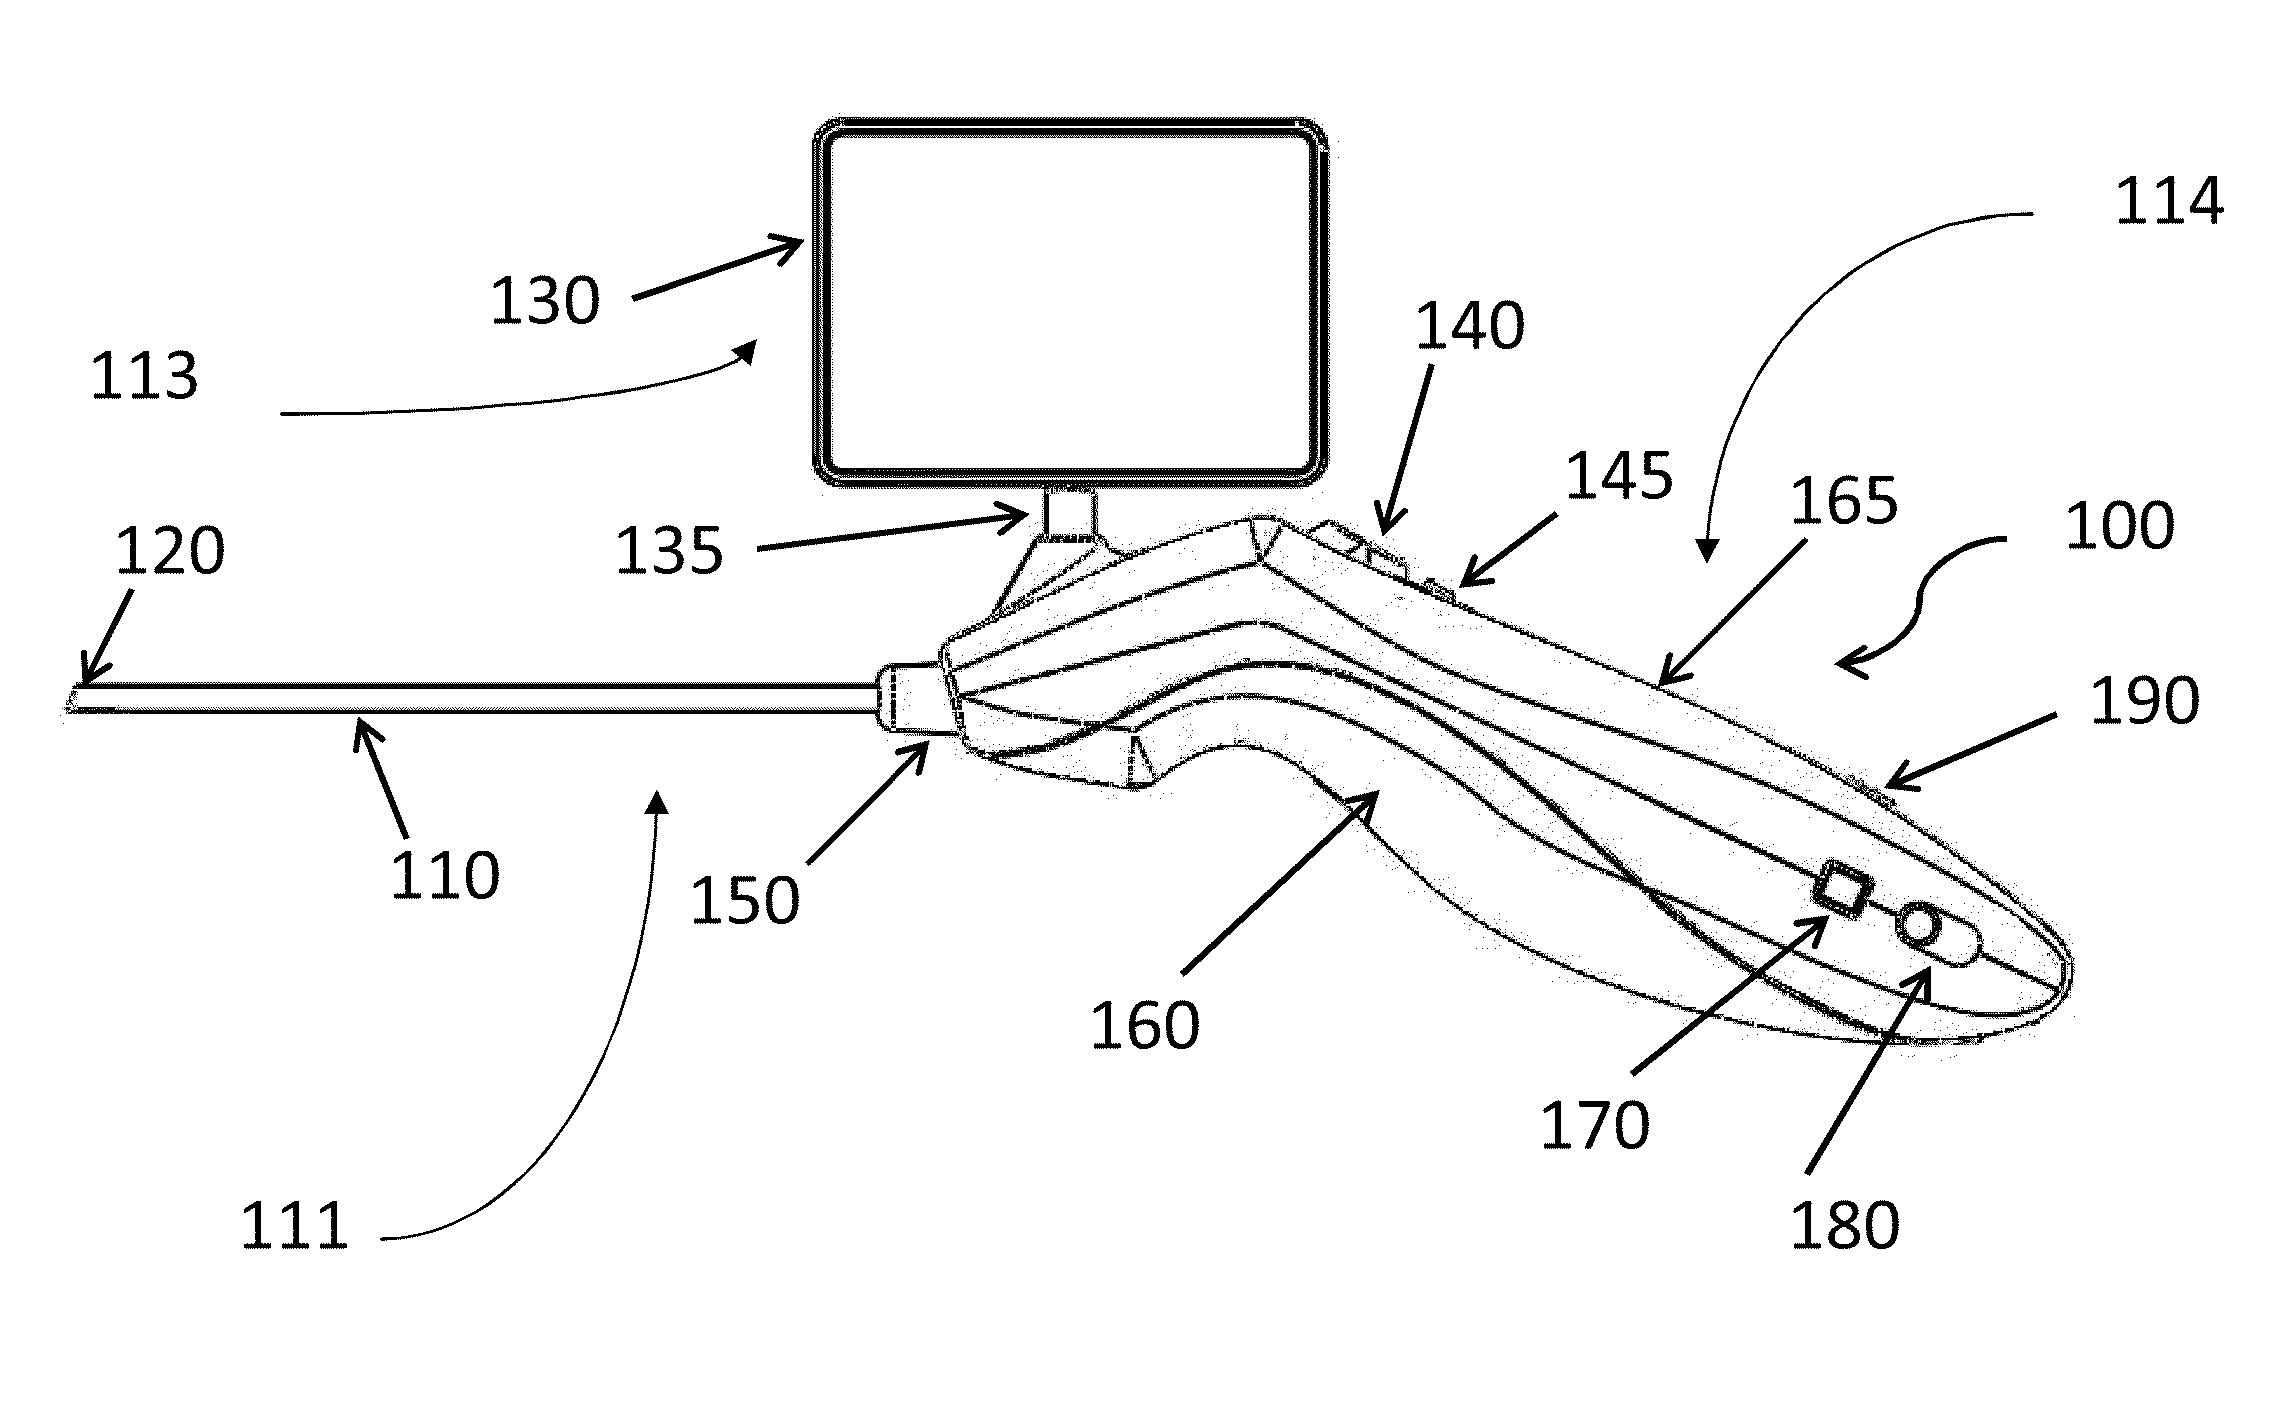 Hand-held minimally dimensioned diagnostic device having integrated distal end visualization